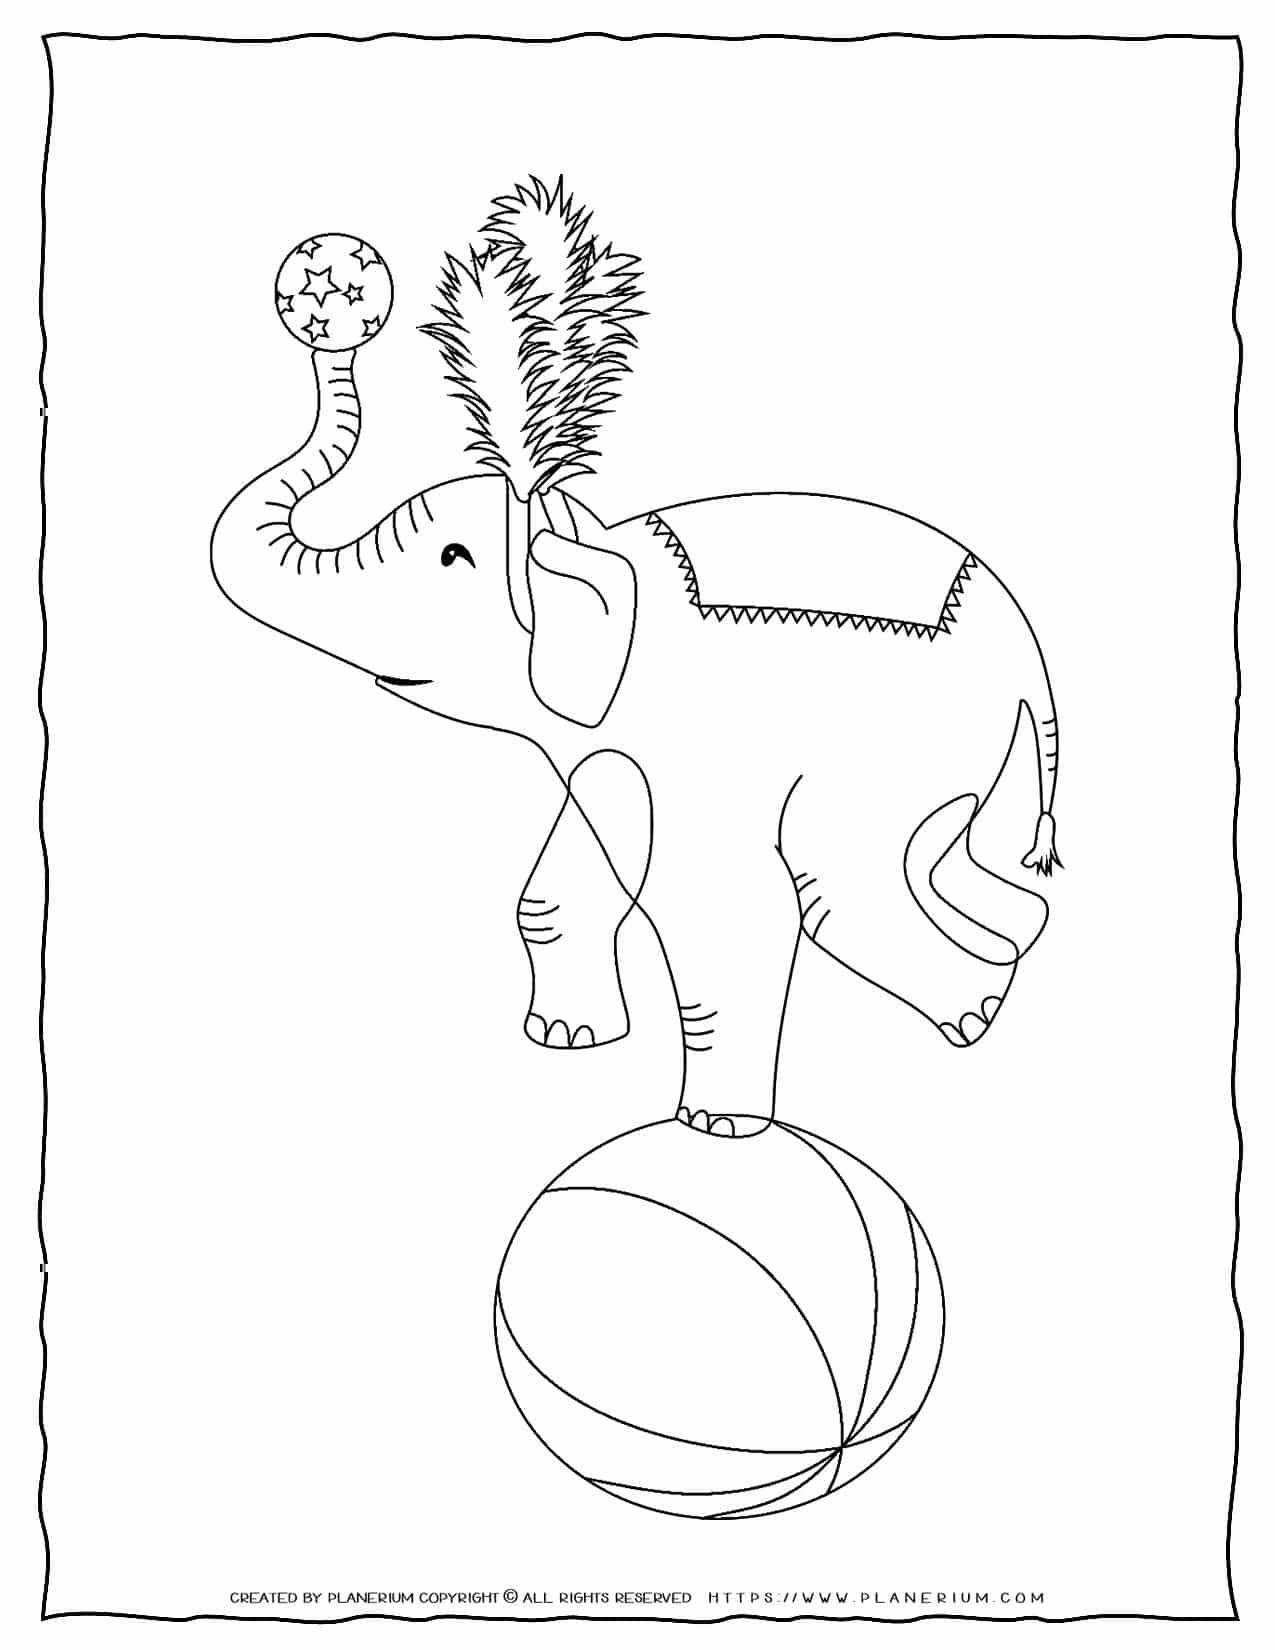 Circus Coloring Page - Elephant on a Ball | Planerium